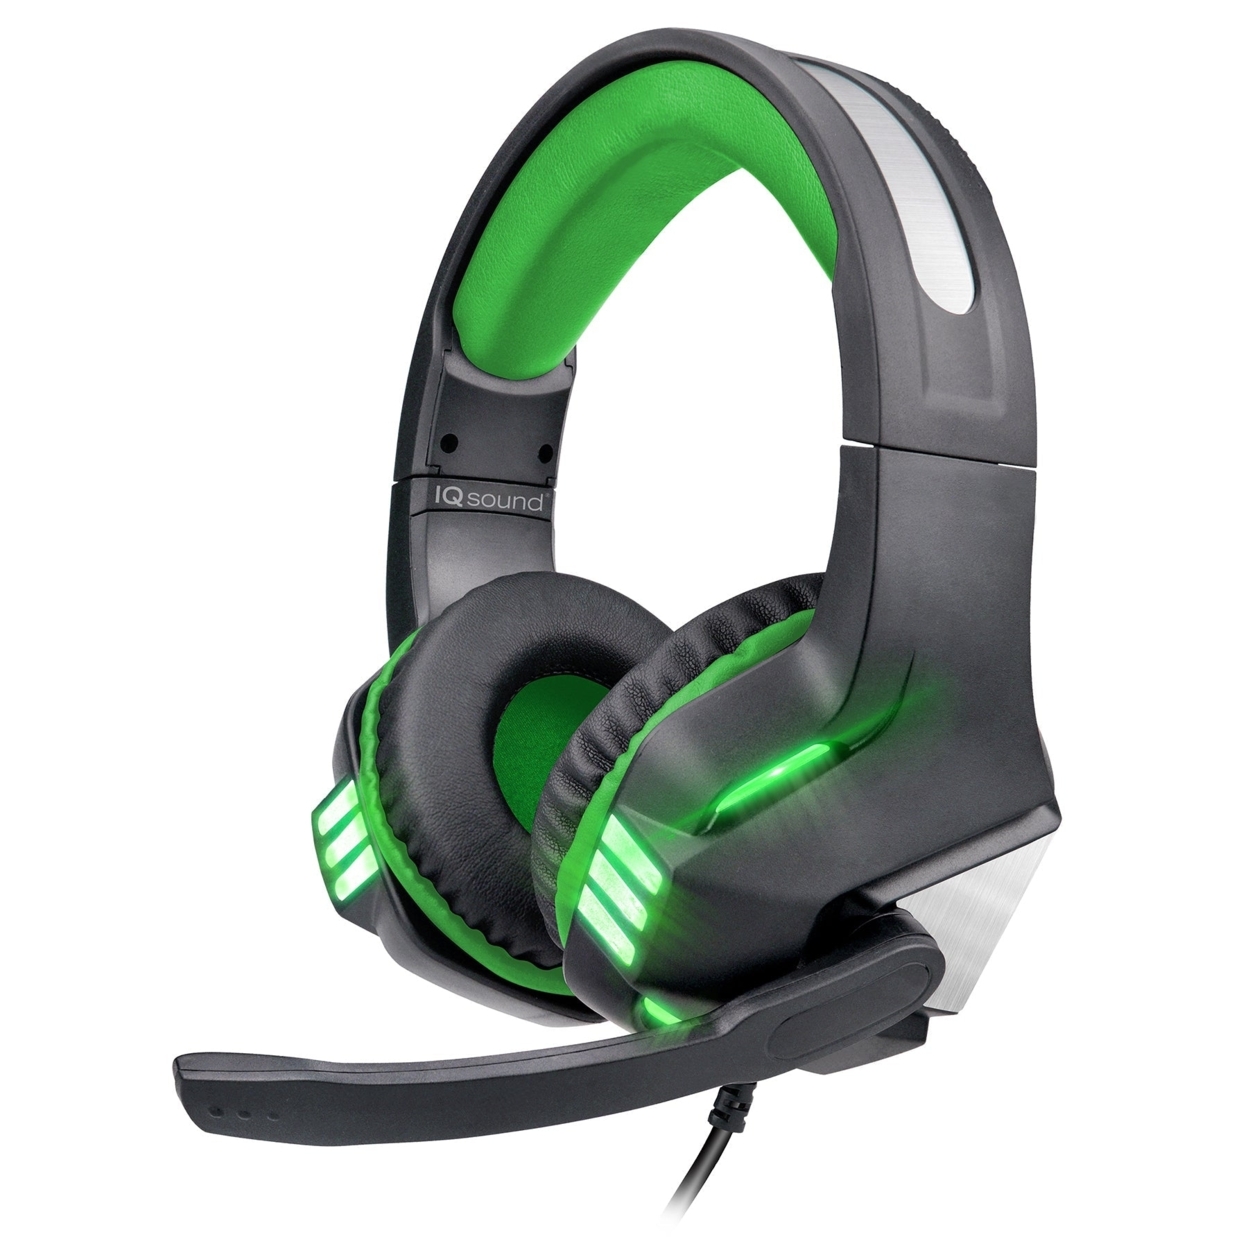 Pro-Wired Gaming Headset With Great Stereo Surround Sound Effect (IQ-480G) - Green